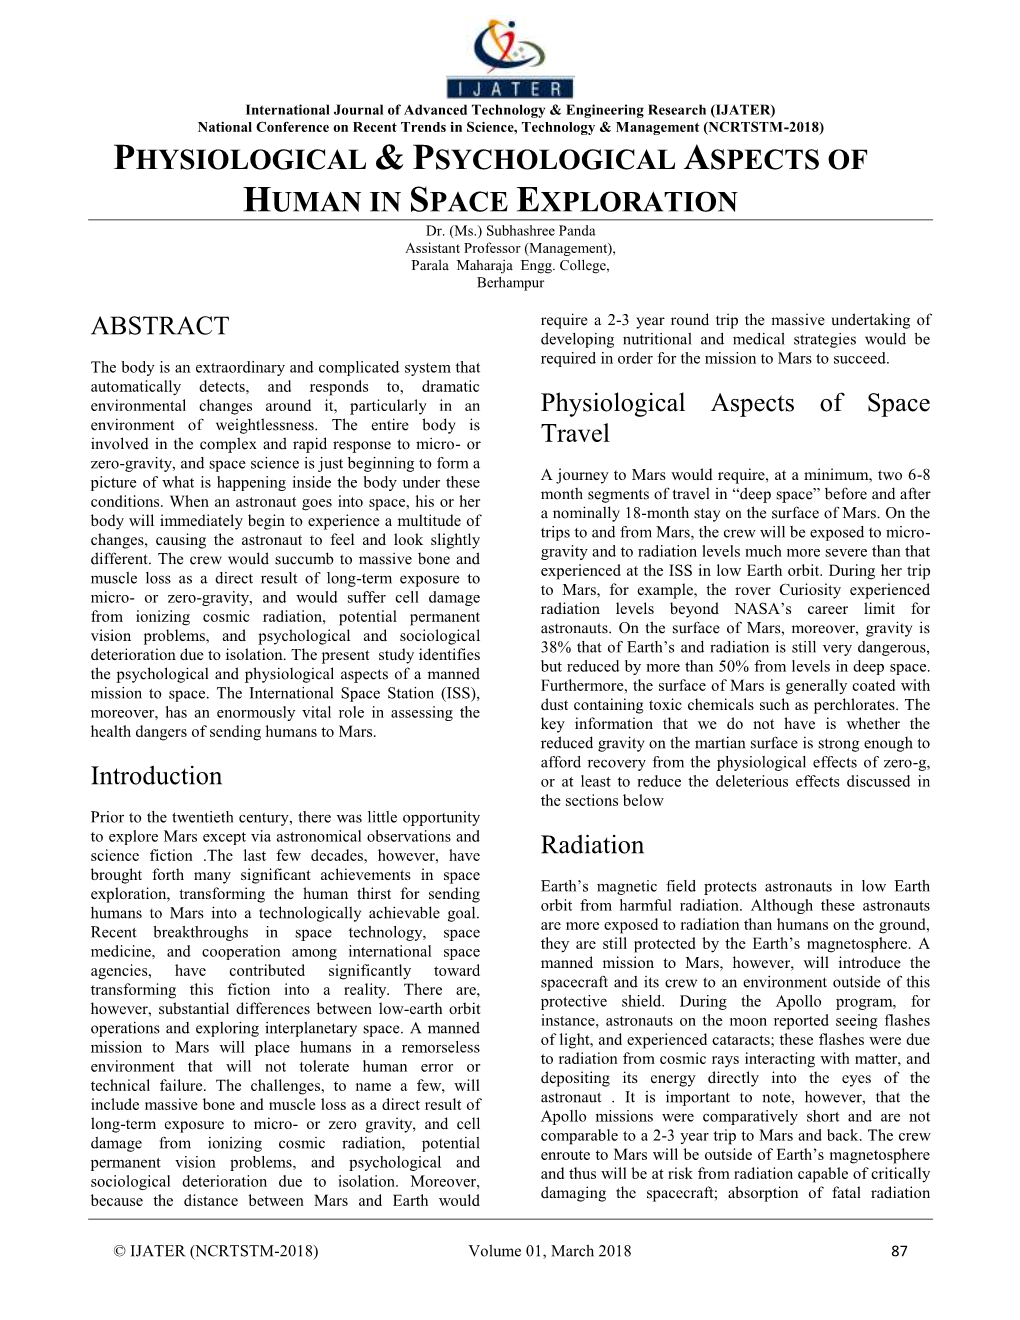 Physiological & Psychological Aspects of Human in Space Exploration